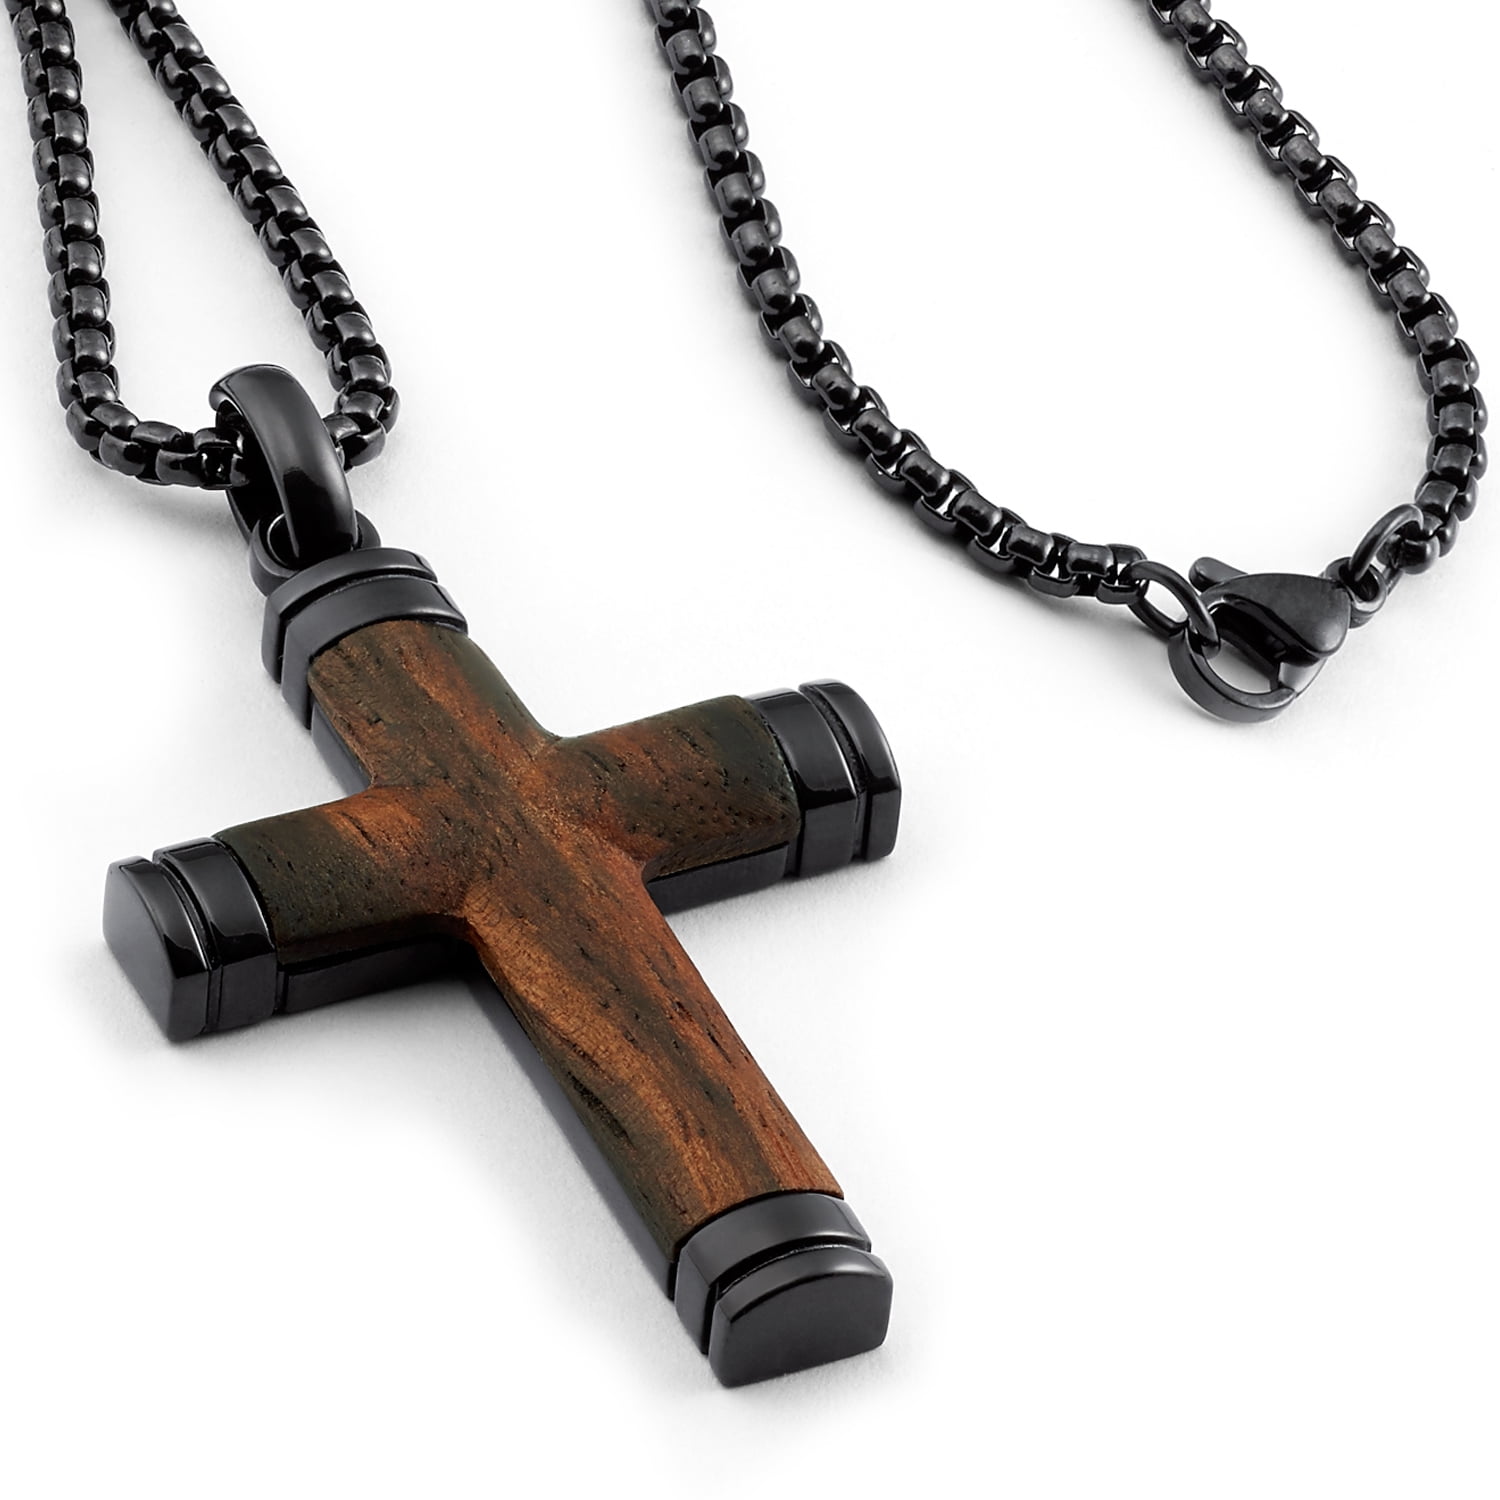 Mens Leather Cross Mens Cross Necklace With Lava Beads Black/Silver Color  Pendant Perfect Male Jewelry Gift DNM03 From Redjune, $15.11 | DHgate.Com